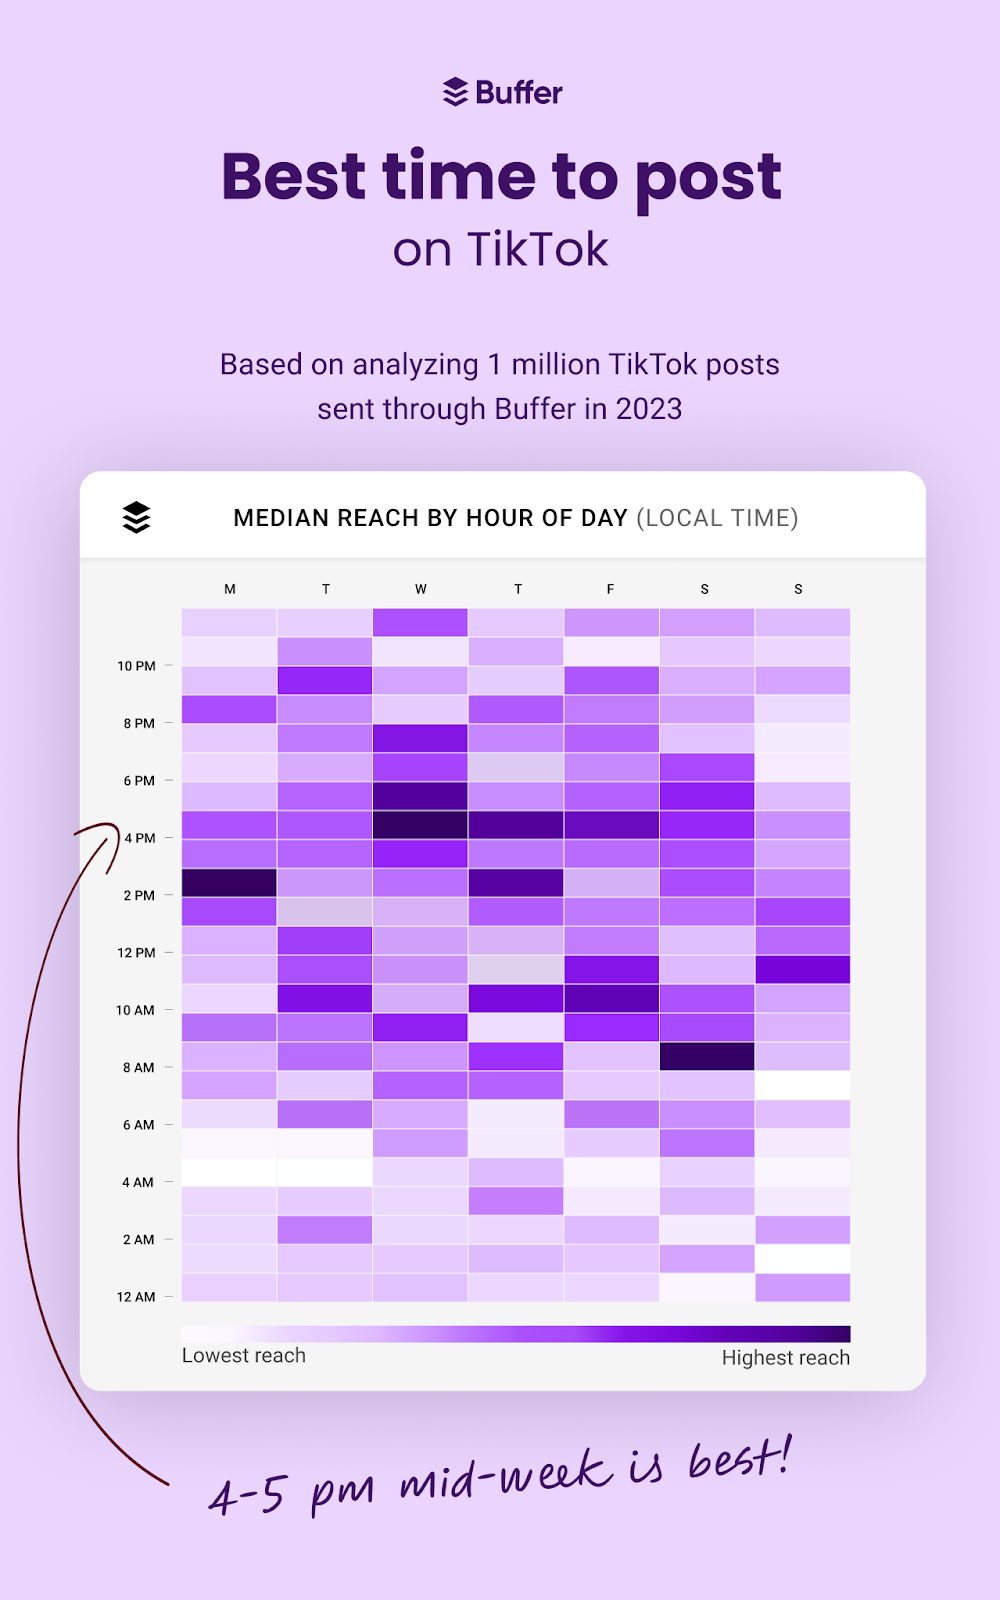 The best time to post on TikTok